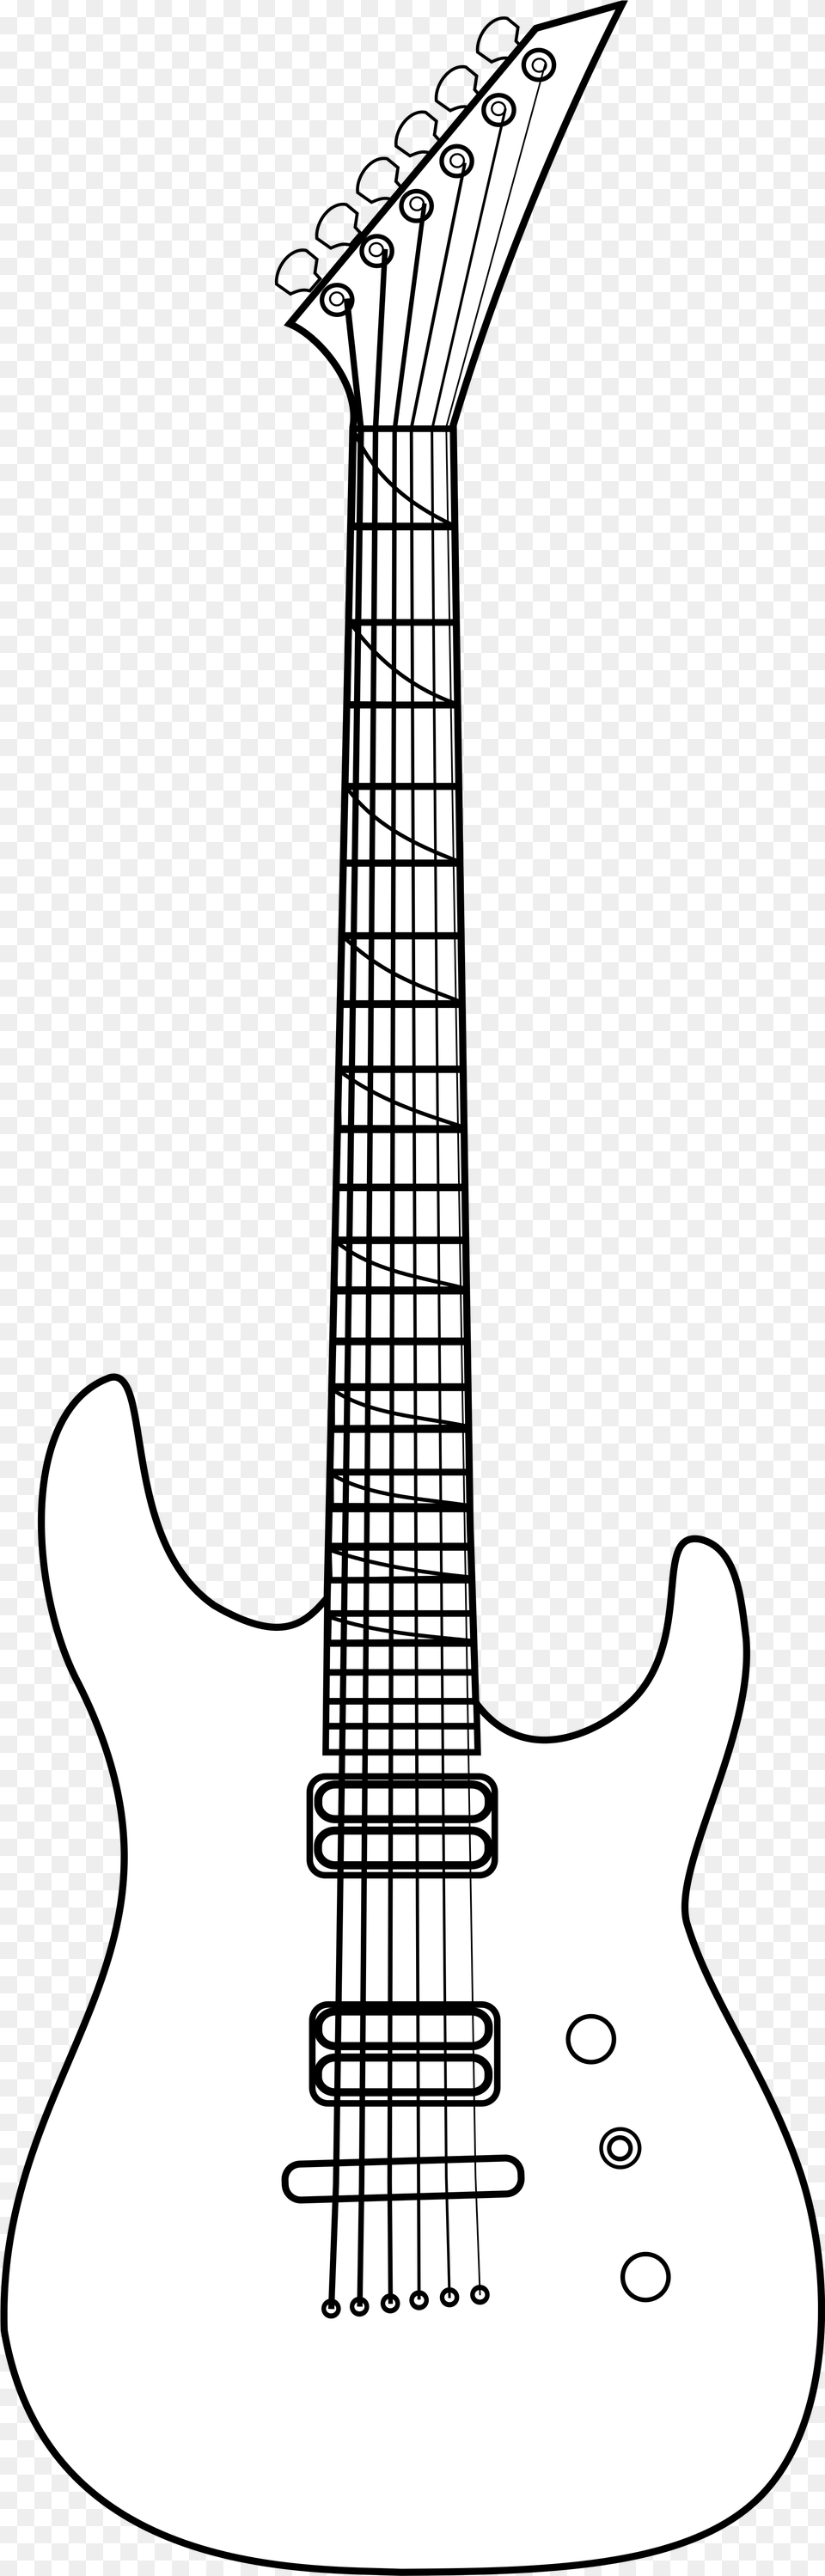 Guitar Outline Draw A Bass Guitar, Bass Guitar, Musical Instrument, Smoke Pipe Free Png Download